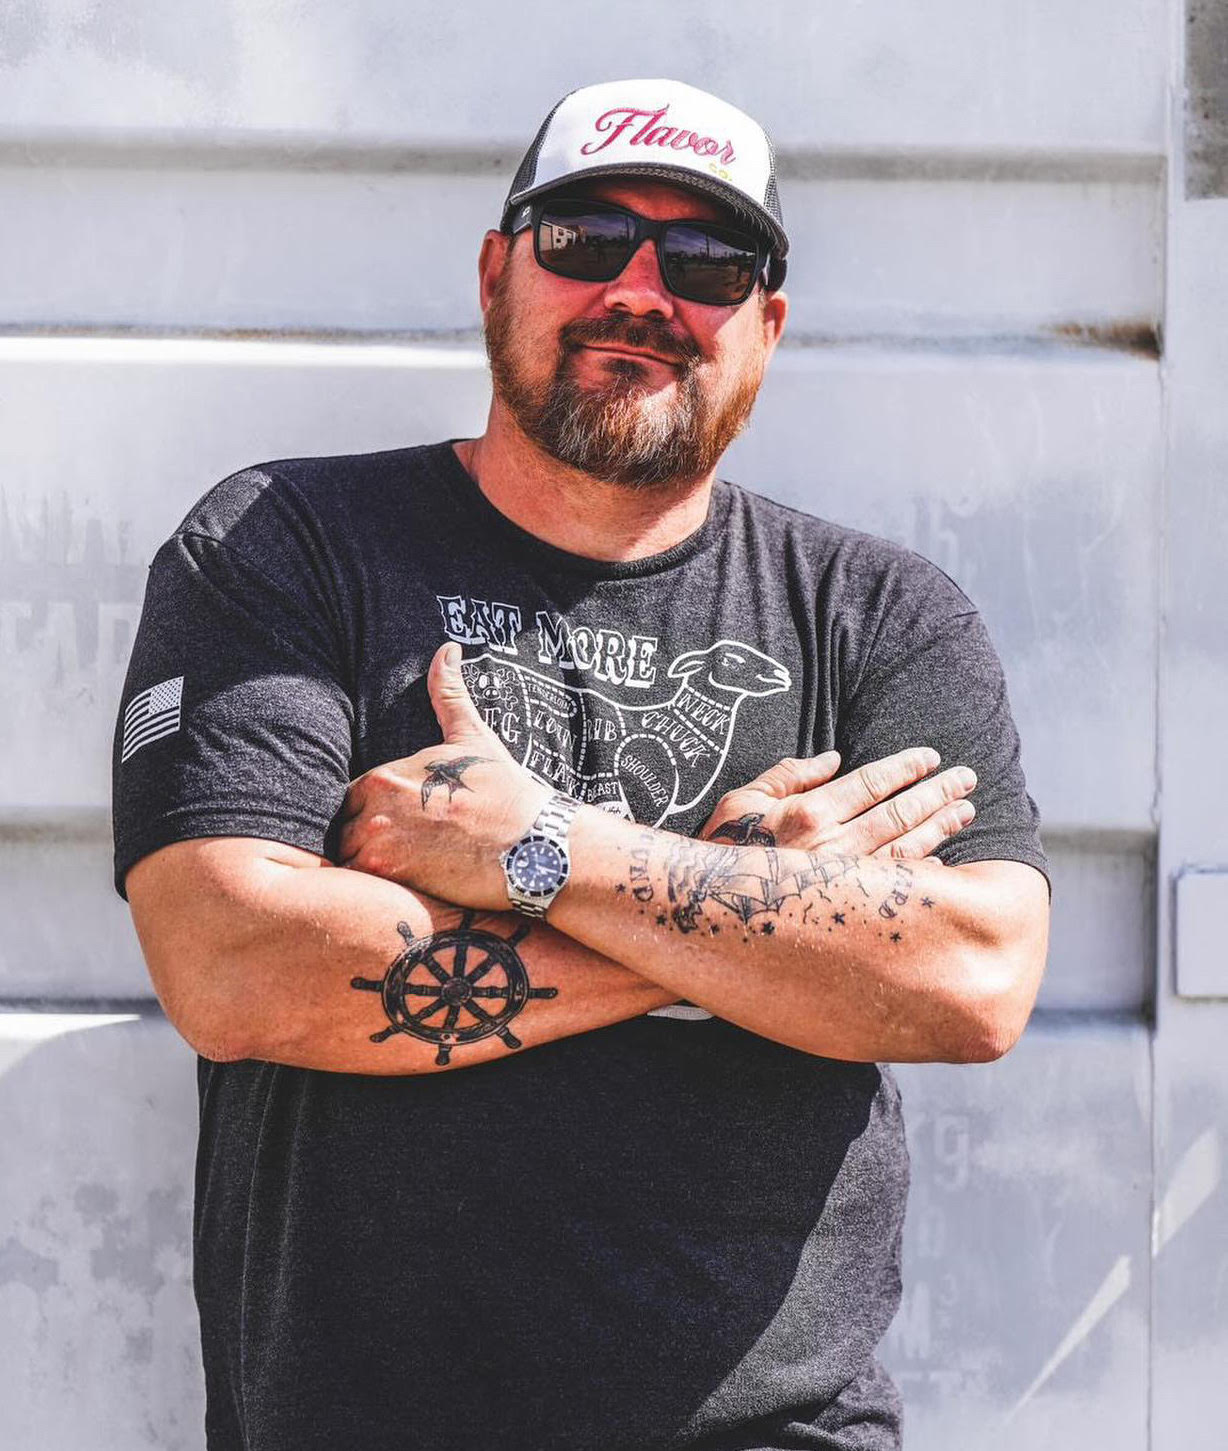 All-Star Chef and Restaurant Line-up Announced for Inaugural Vivid Food in Australia – Reigning World Barbecue Champion Sterling Smith to be featured